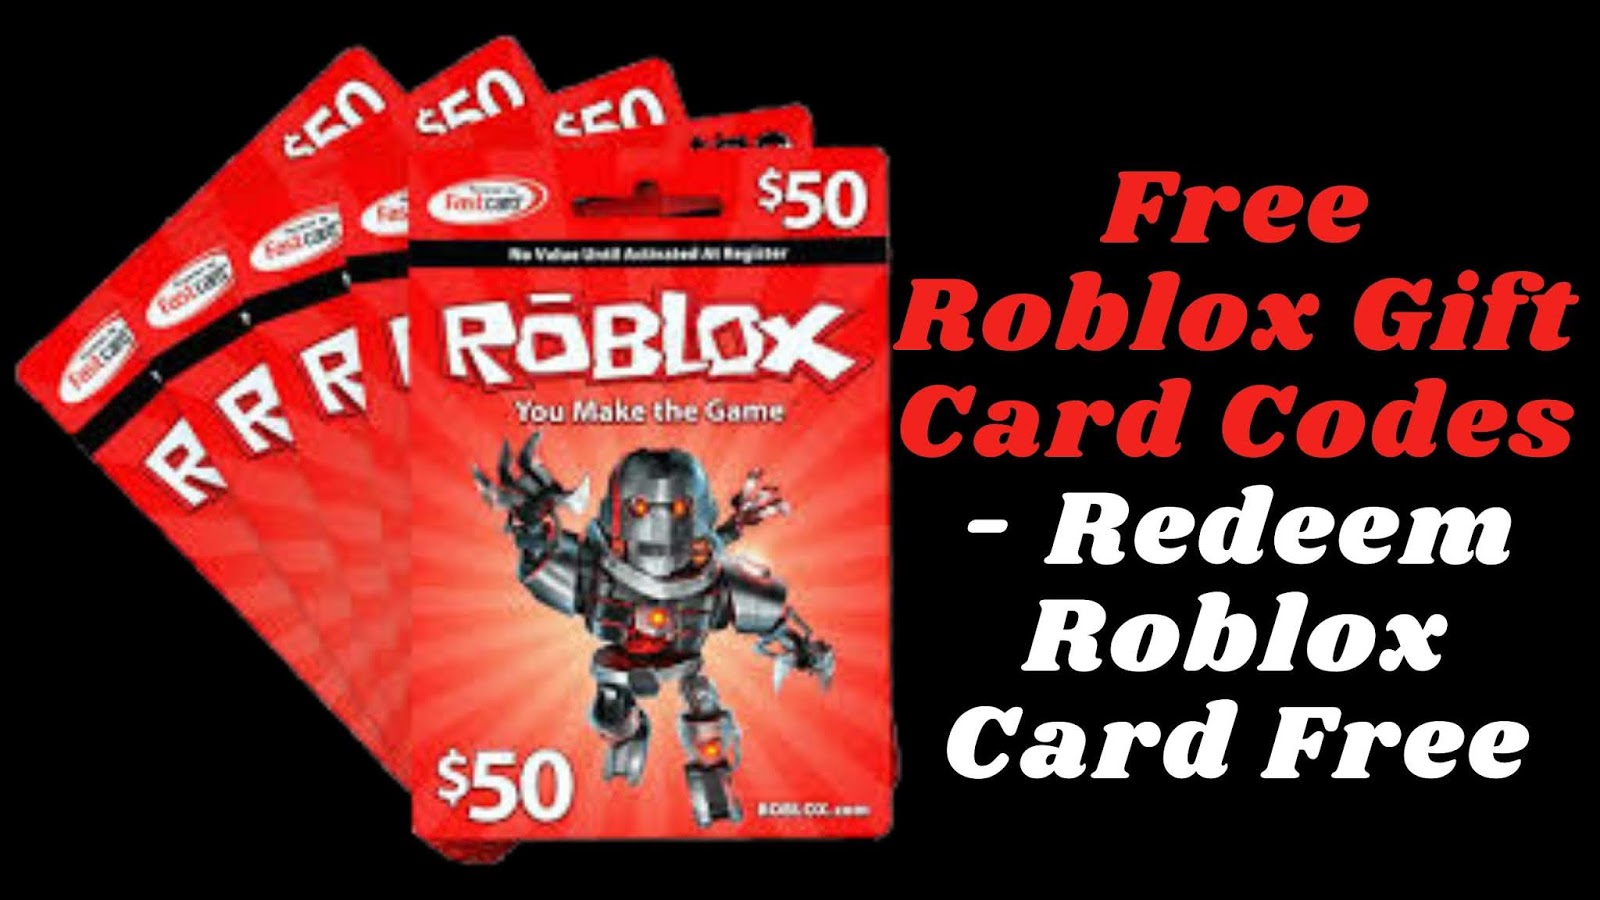 Free Gift Cards Free Roblox Gift Card Codes Redeem Roblox Card Free - free robux roblox card